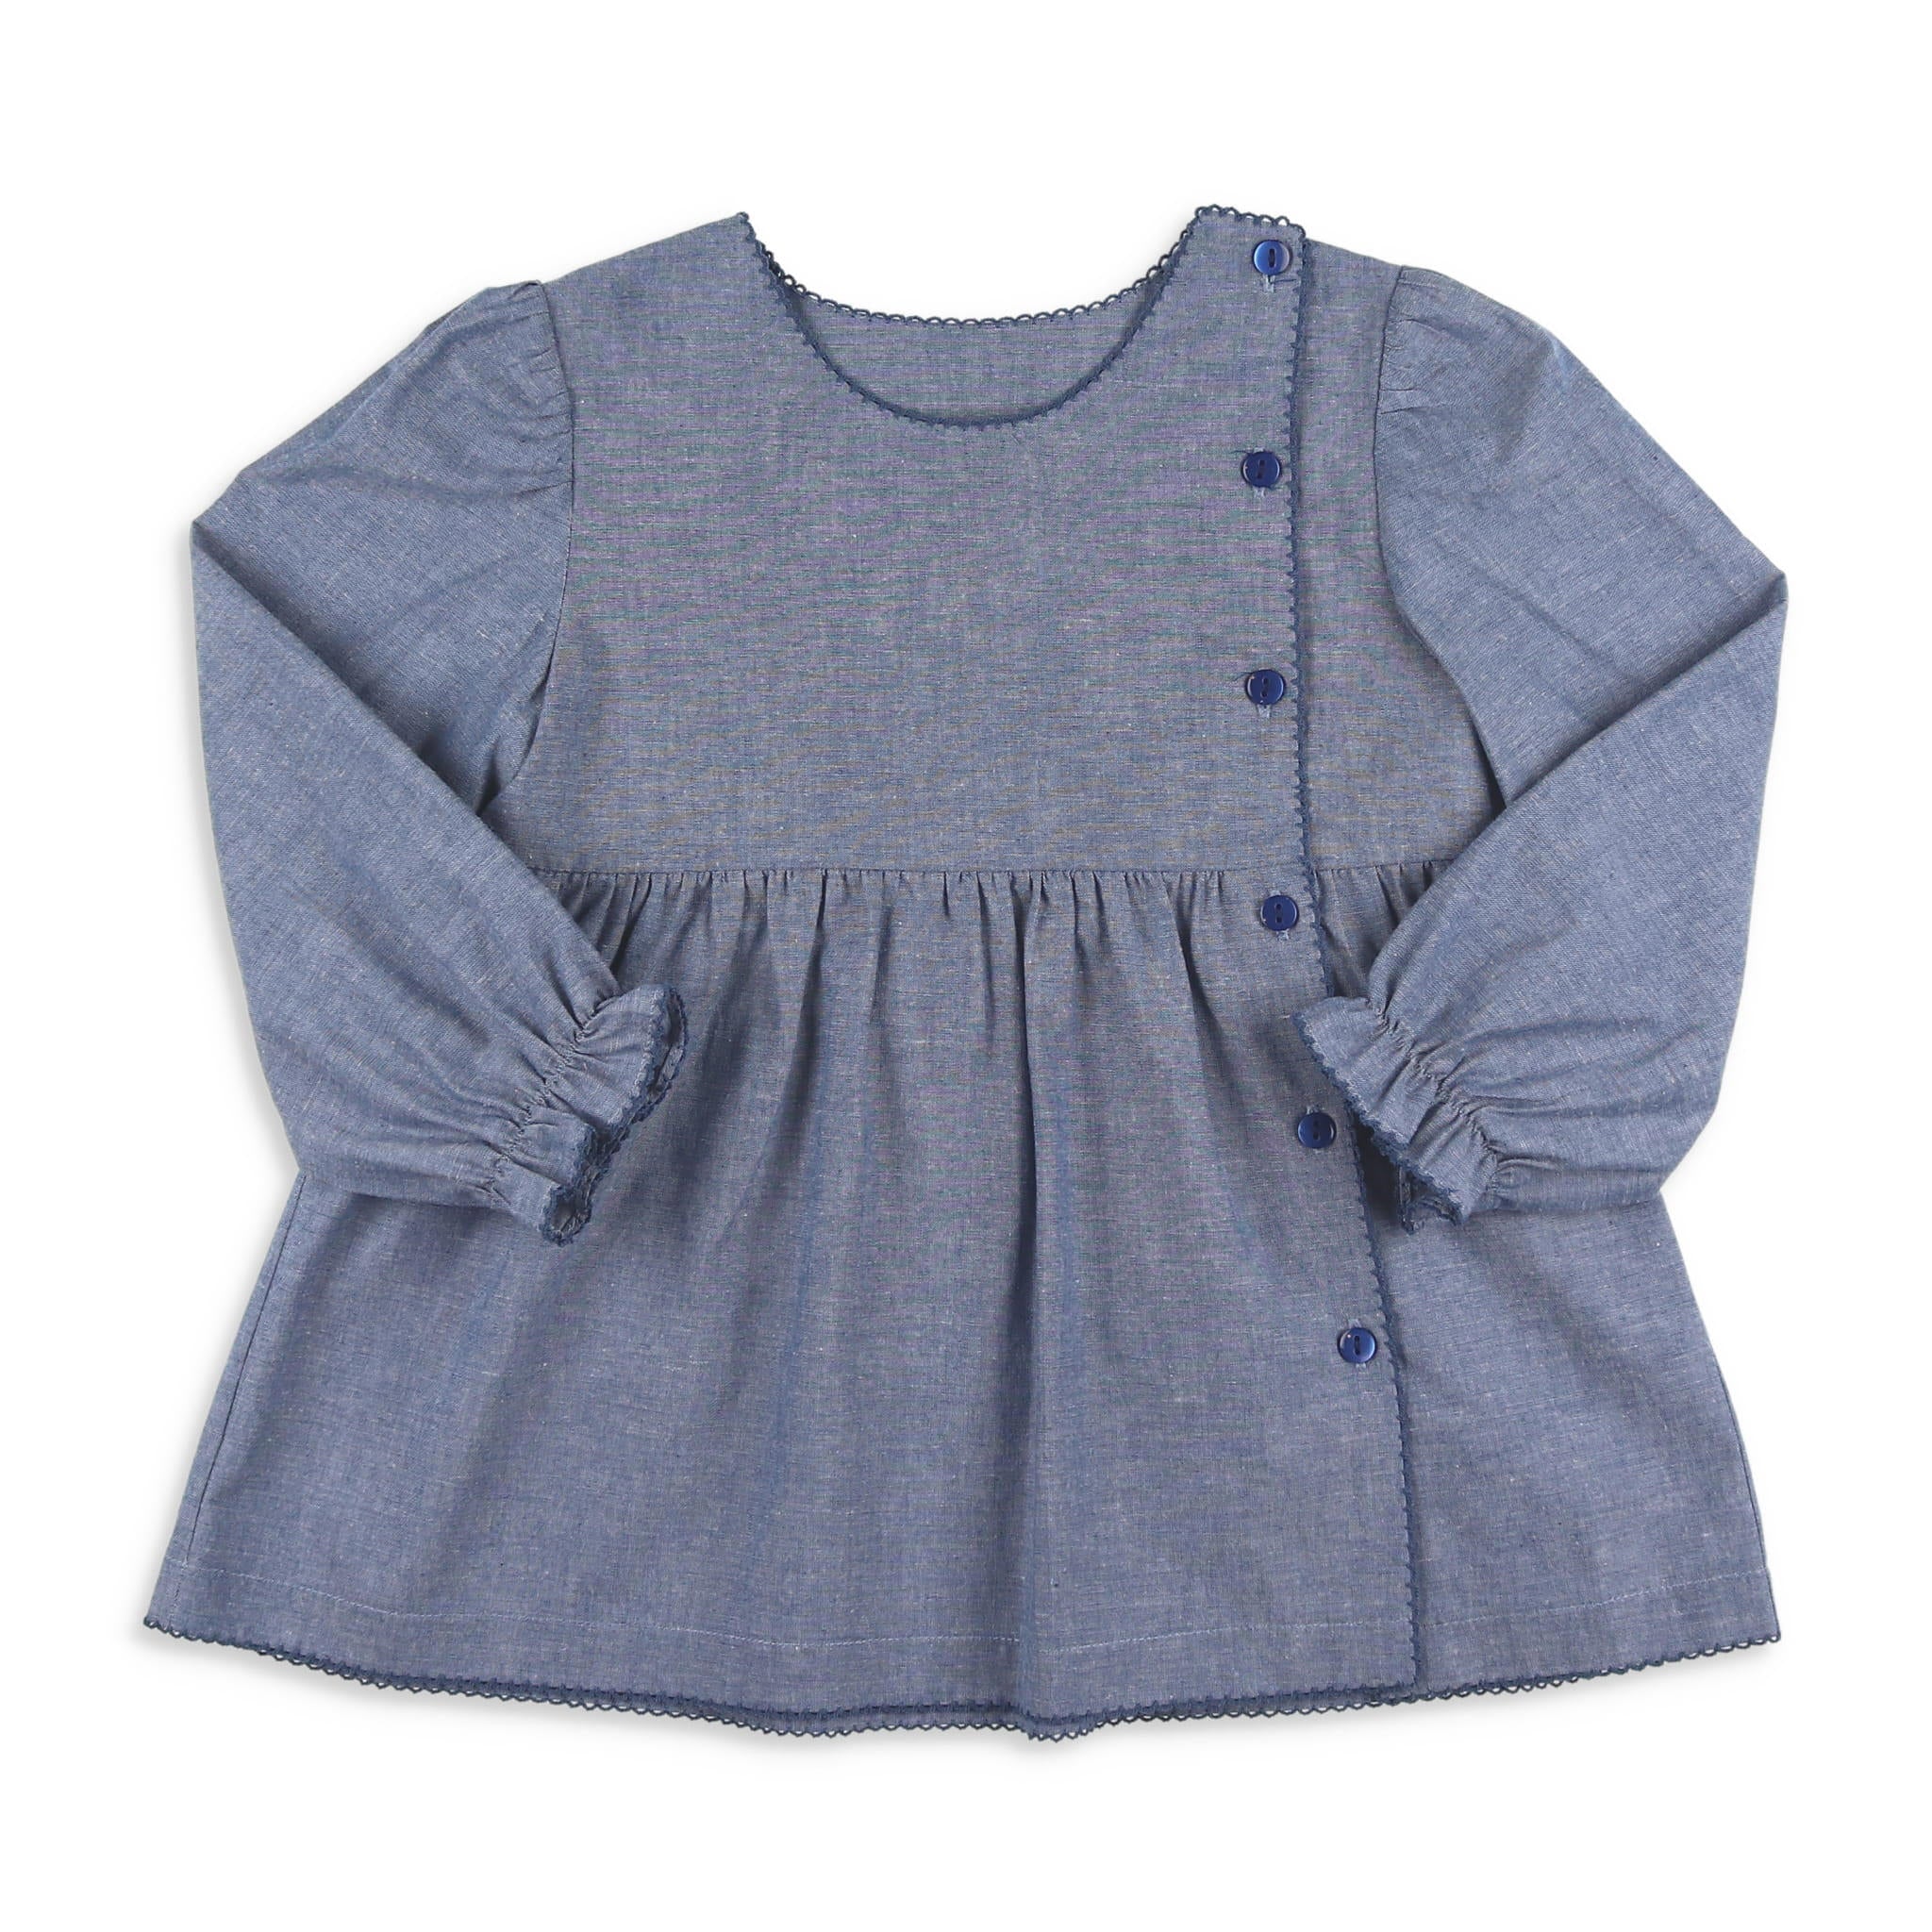 Girls Chambray Sallie Top - Shrimp and Grits Kids - Shrimp and Grits Kids